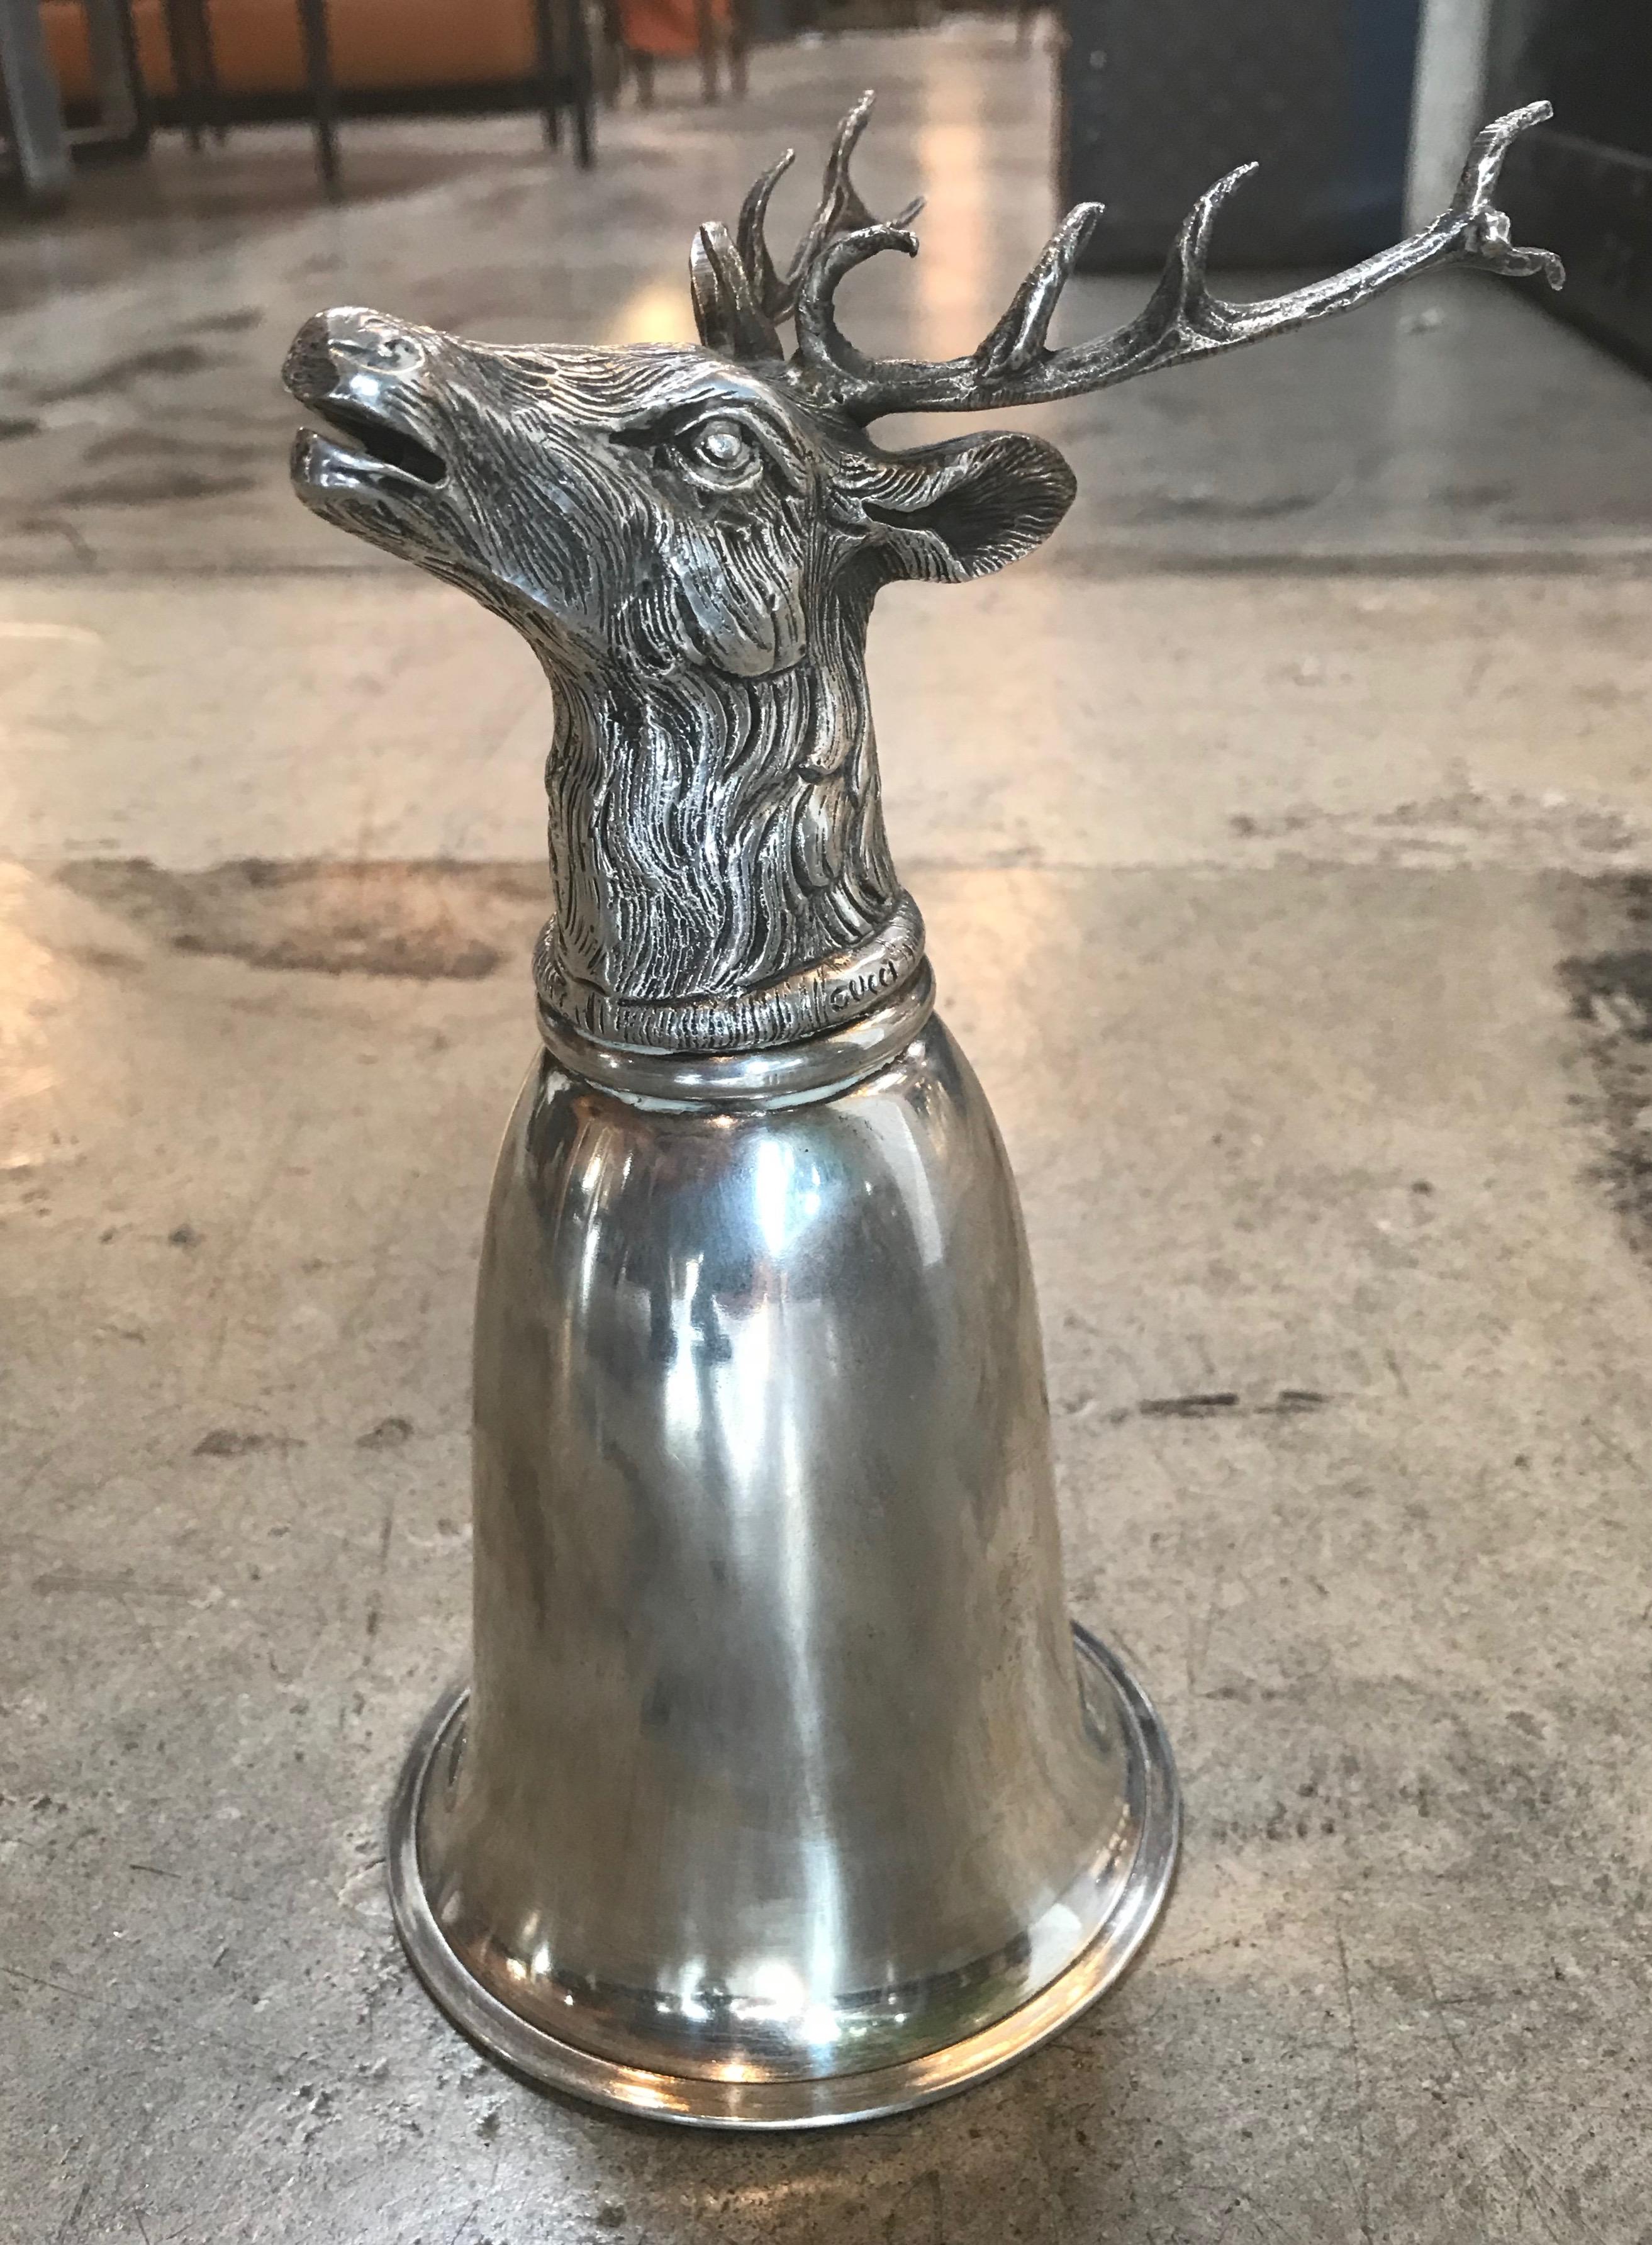 Gucci stag silver stirrup cup signed, Italy, 1970s. Can be displayed as pictured or with the cup upside down, resting on the stag's antlers. Signed Gucci with impressed marked.